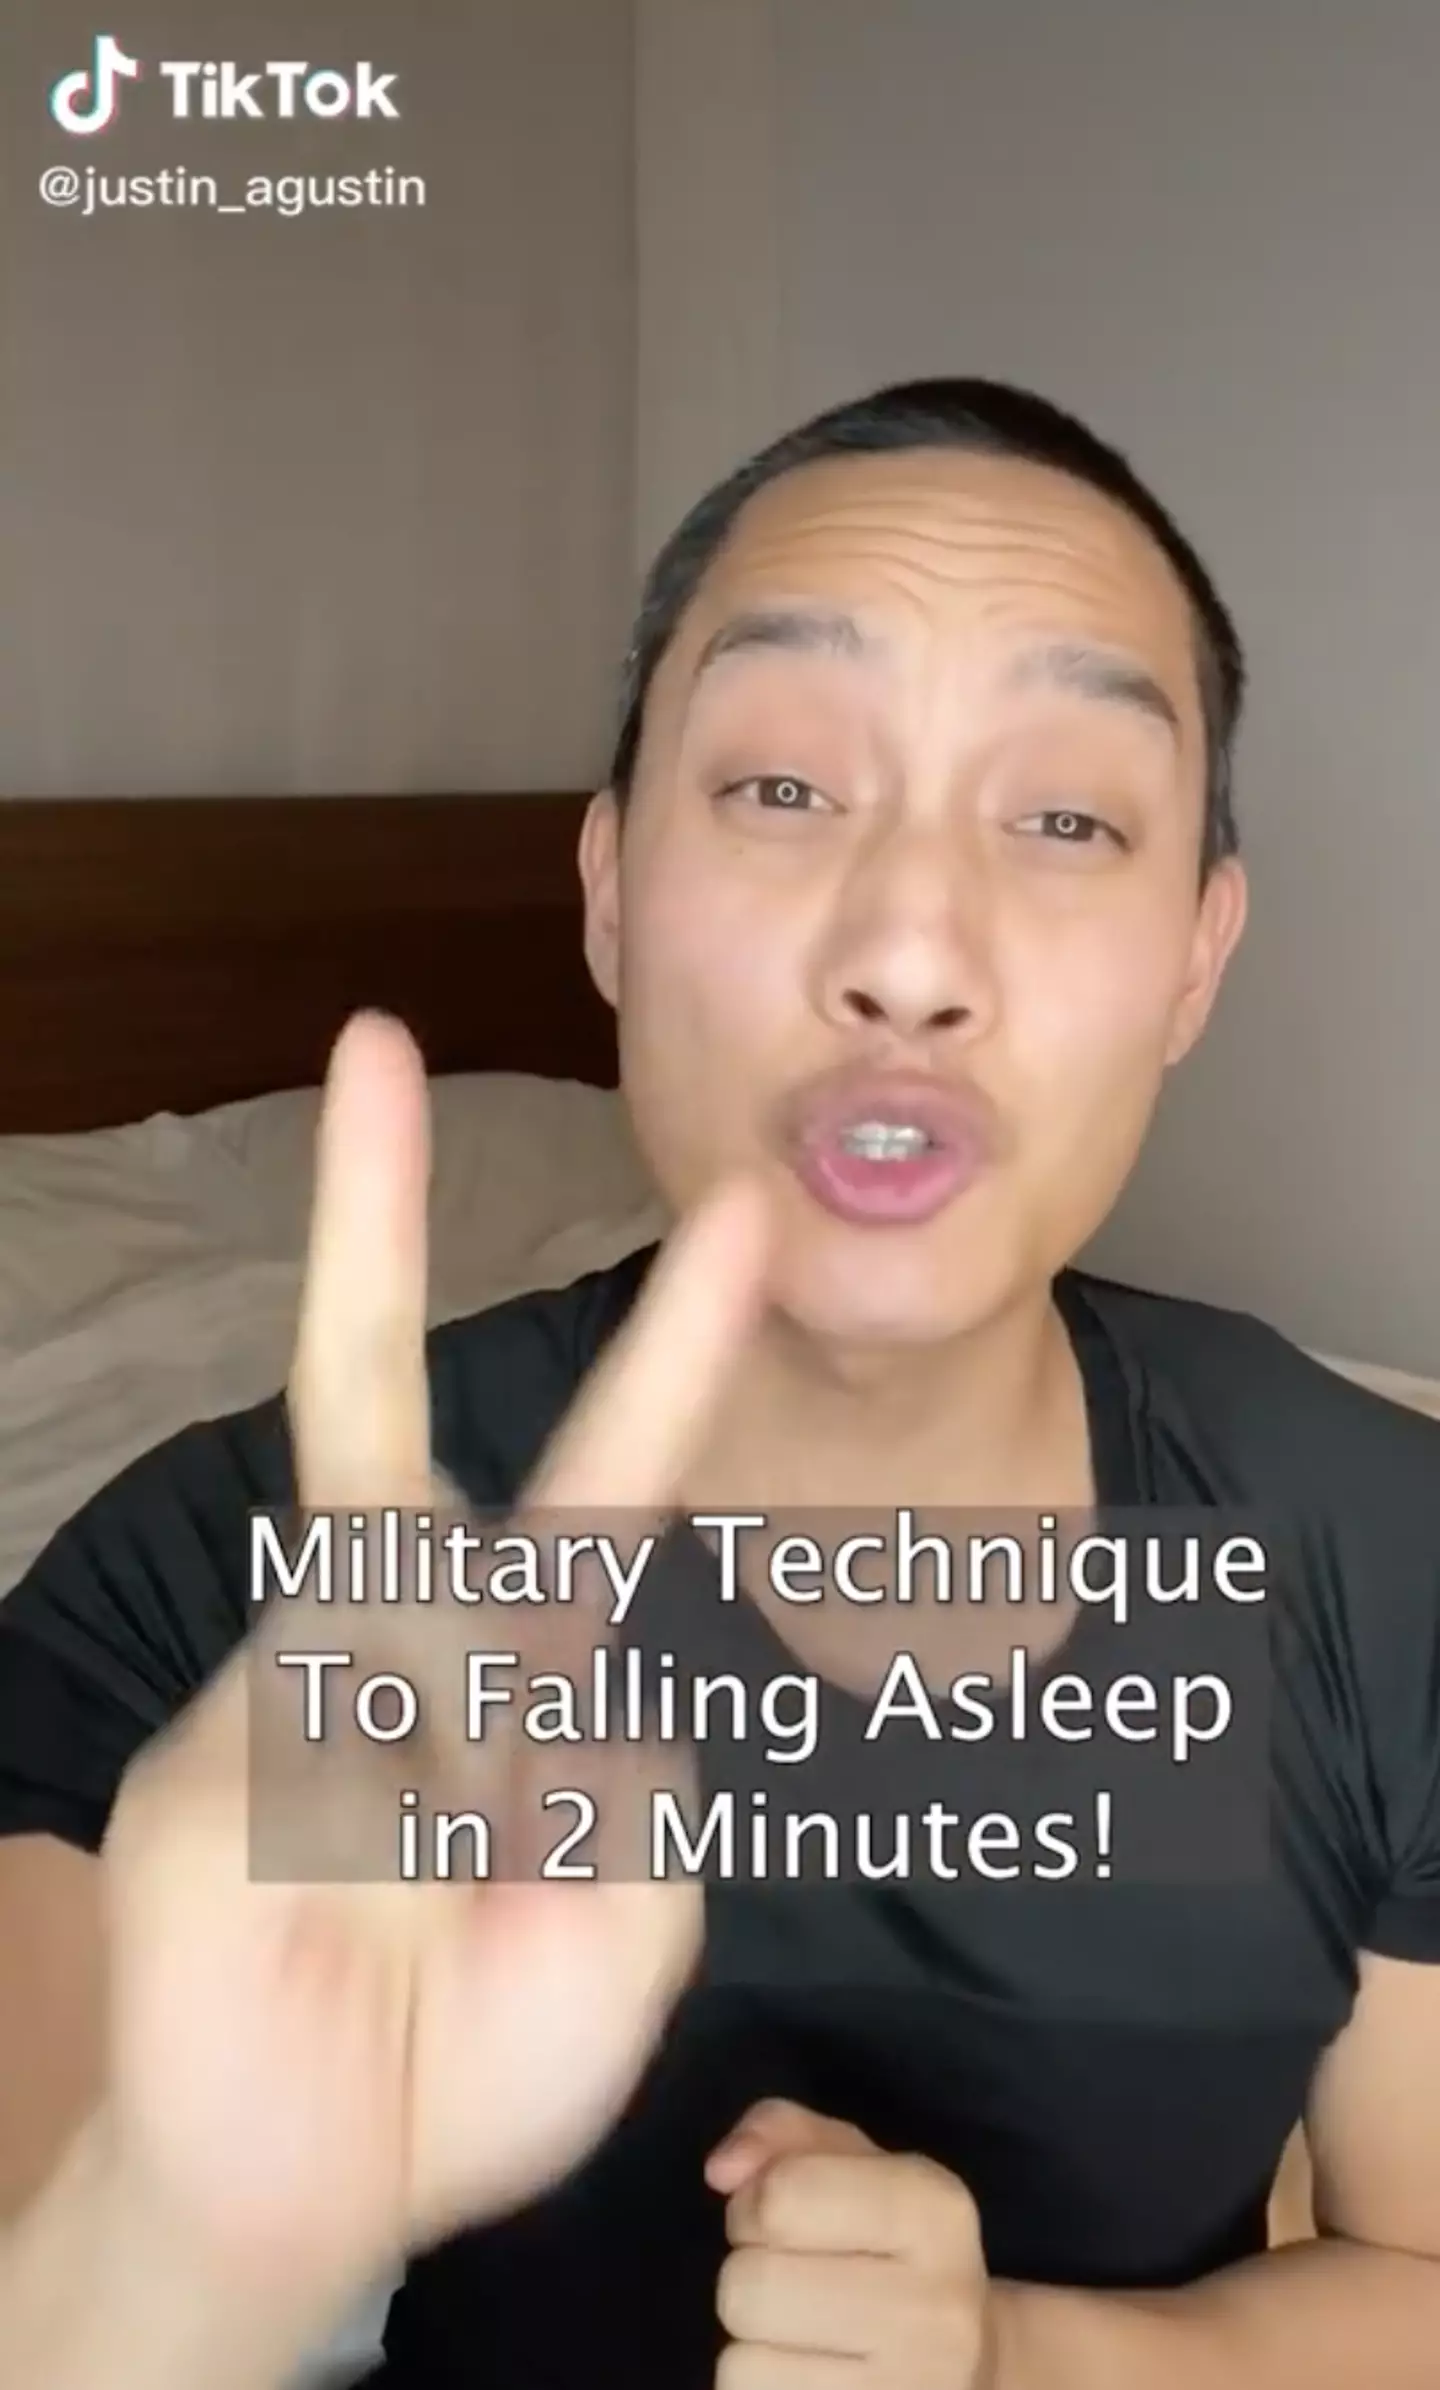 Justin explained how the military technique works to his 1.7million TikTok followers. (